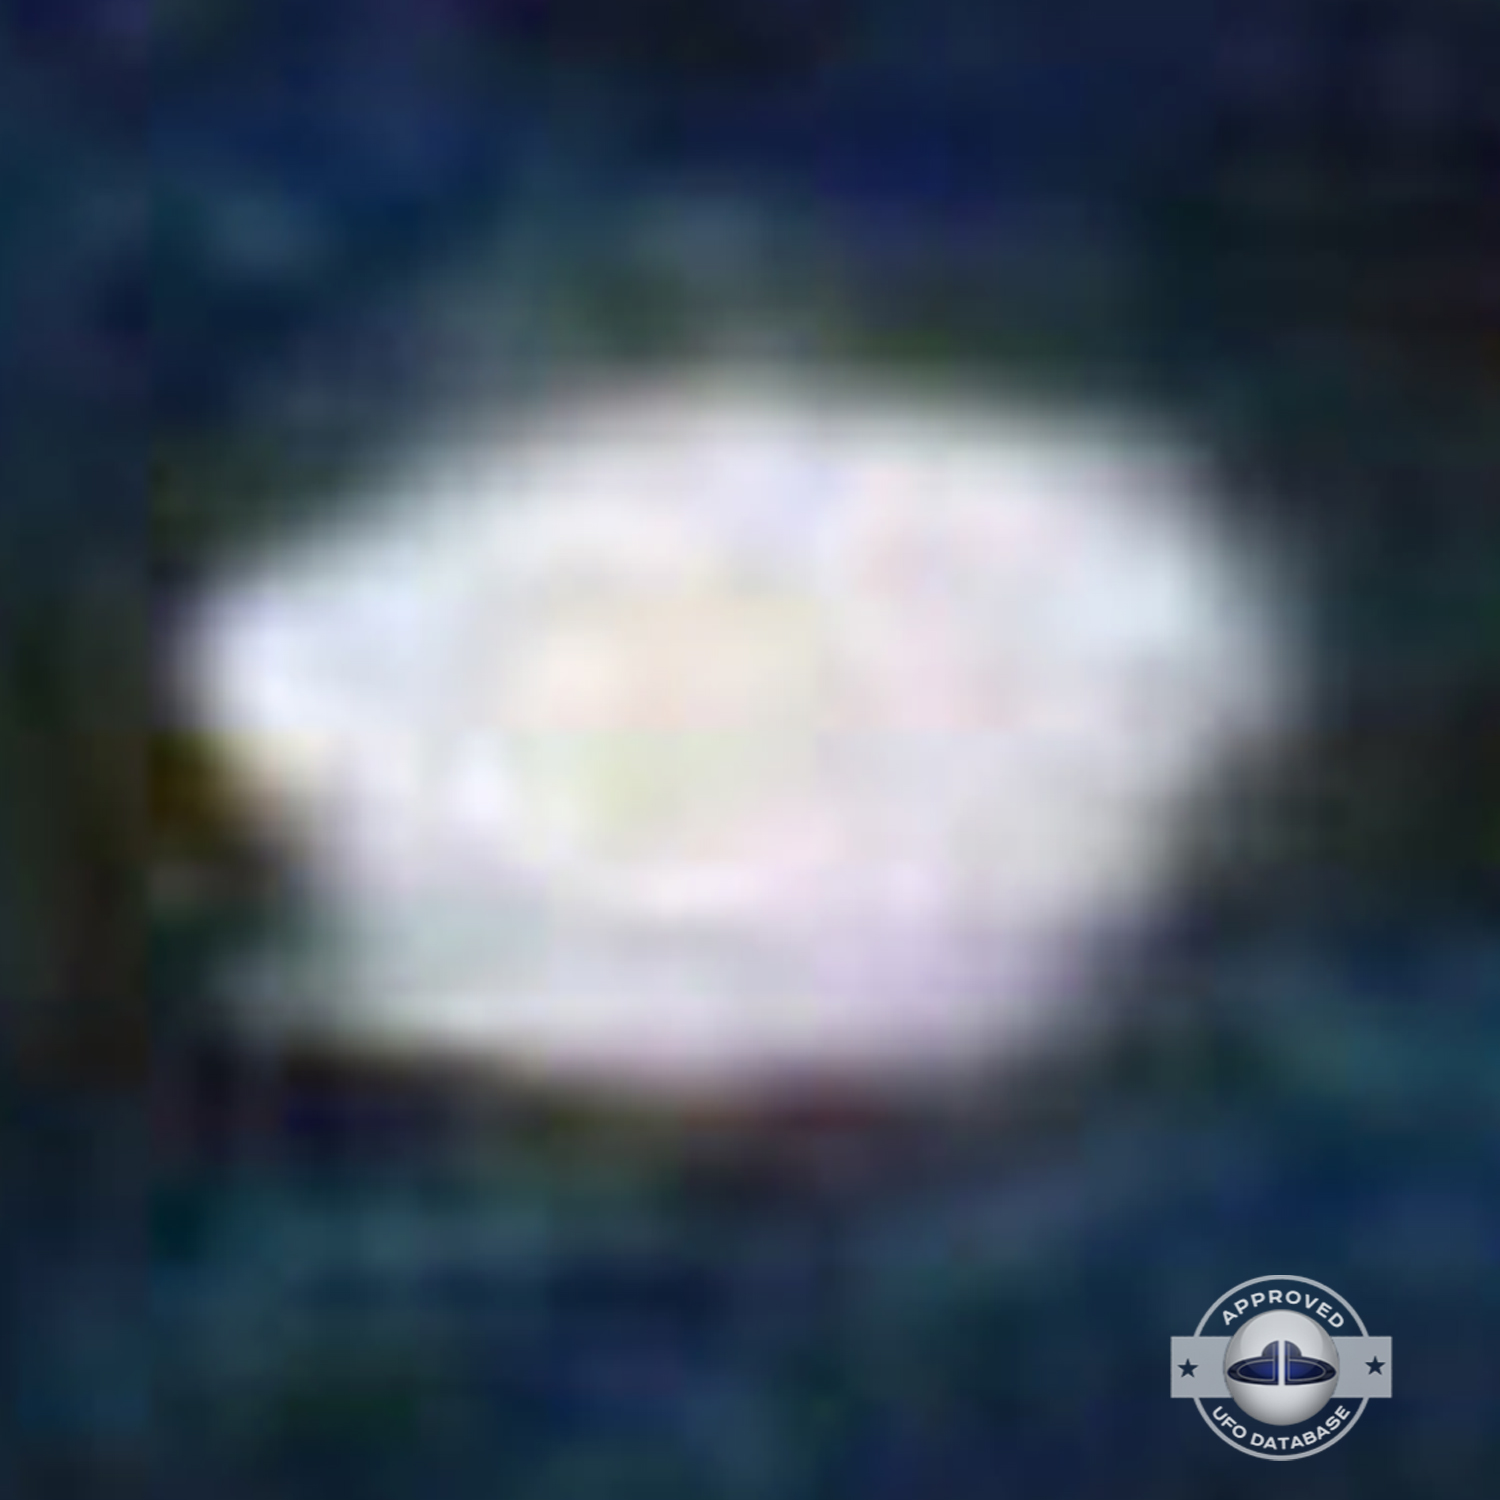 very bright disc-like object remaining stationary near a thunderhead UFO Picture #102-6